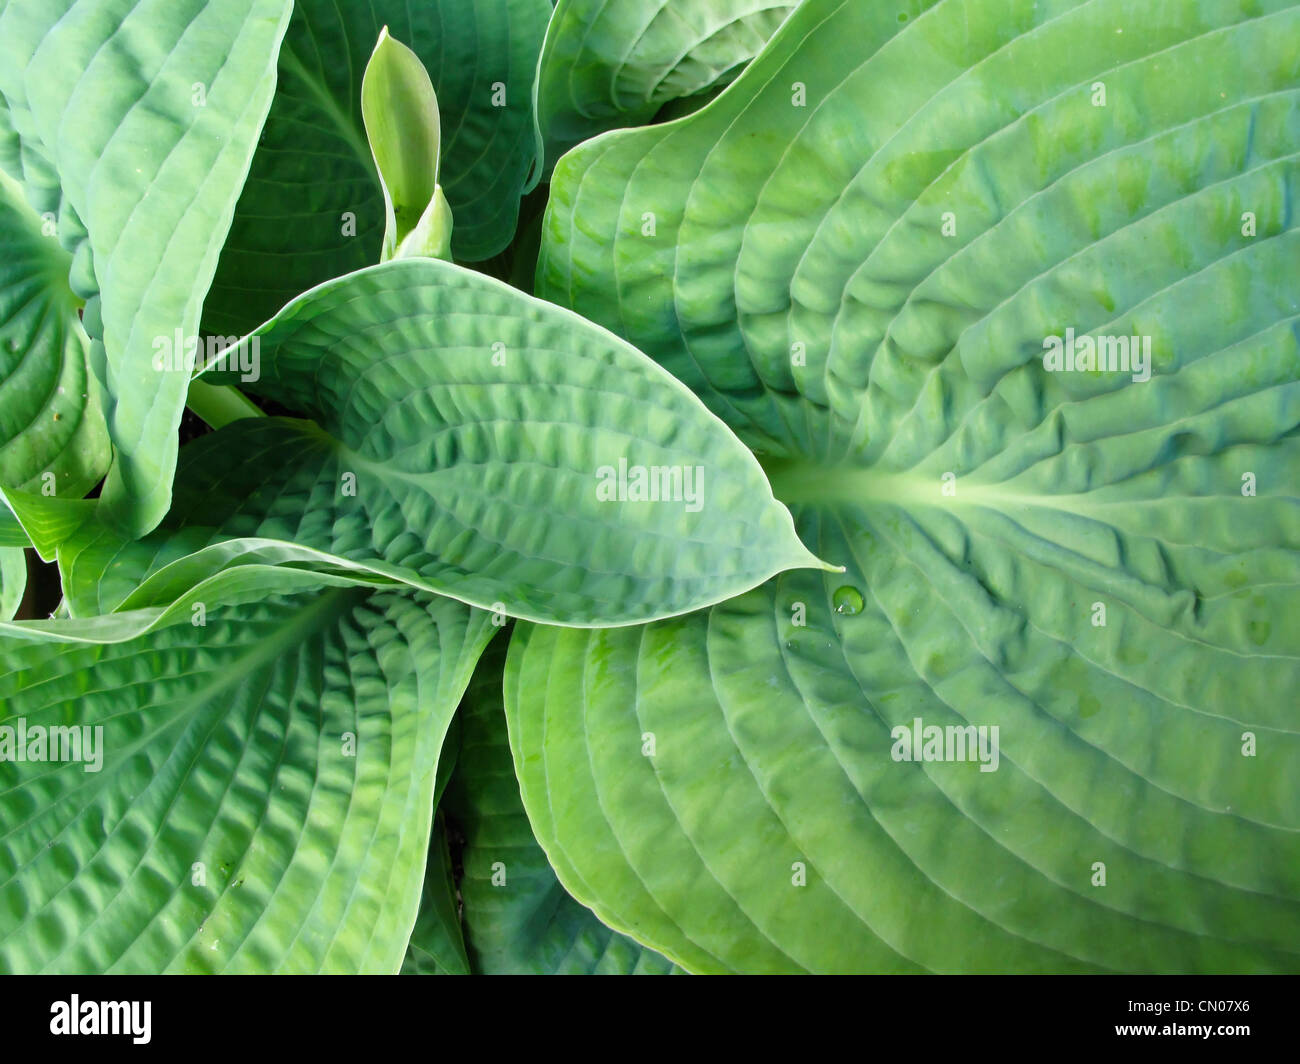 Plants, Hosta, detail of green leaves with a small water droplet. Stock Photo